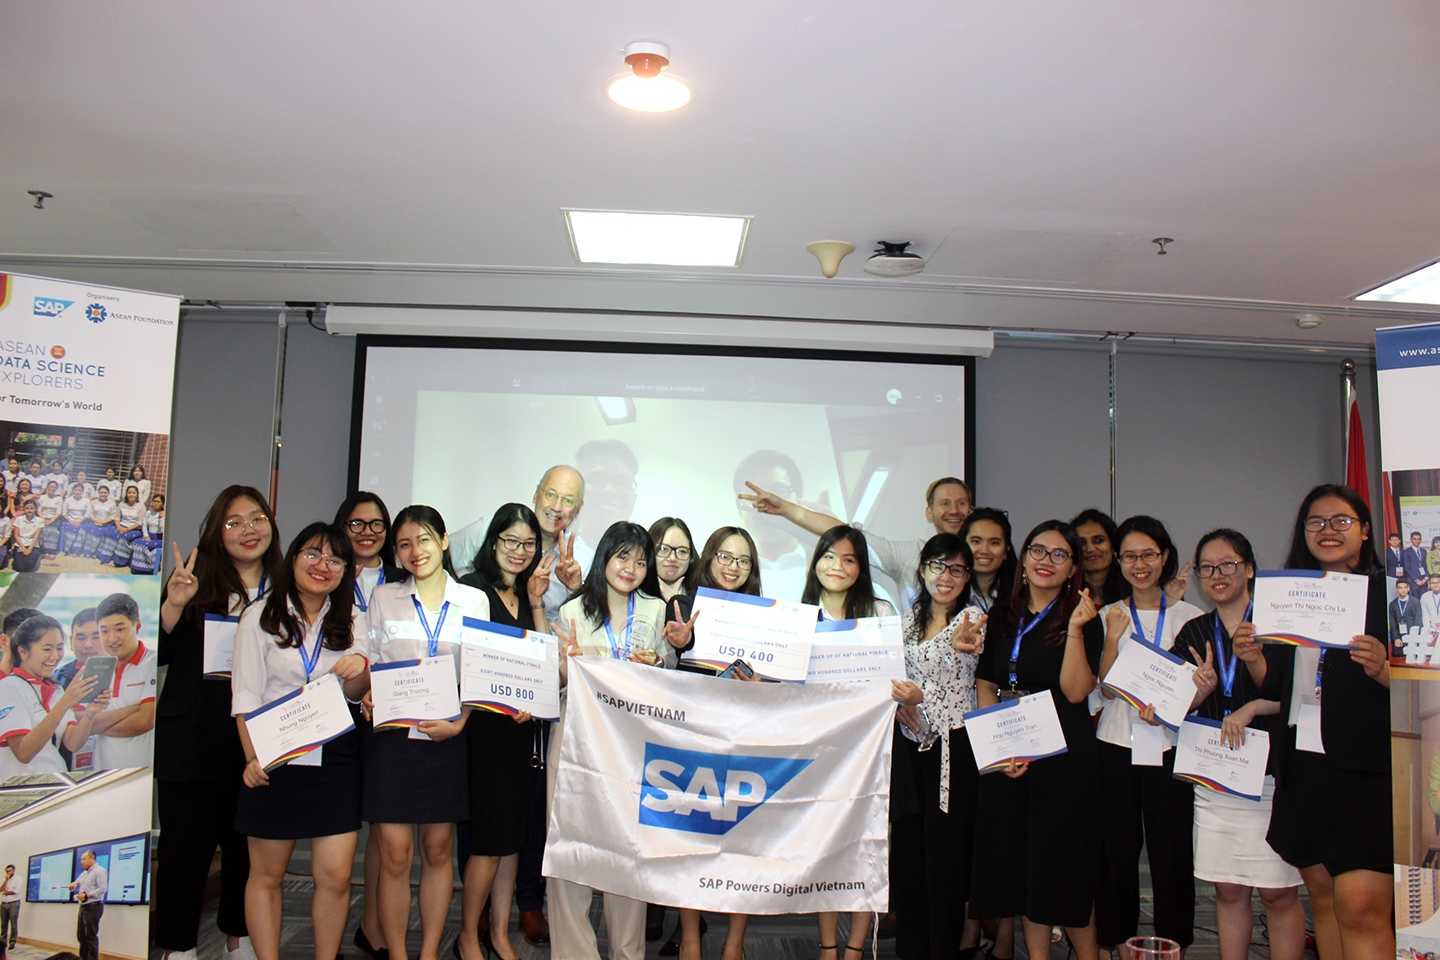 The final round of ASEAN Data Science Competition 2019 in Vietnam was held at RMIT Vietnam's Hanoi campus. 